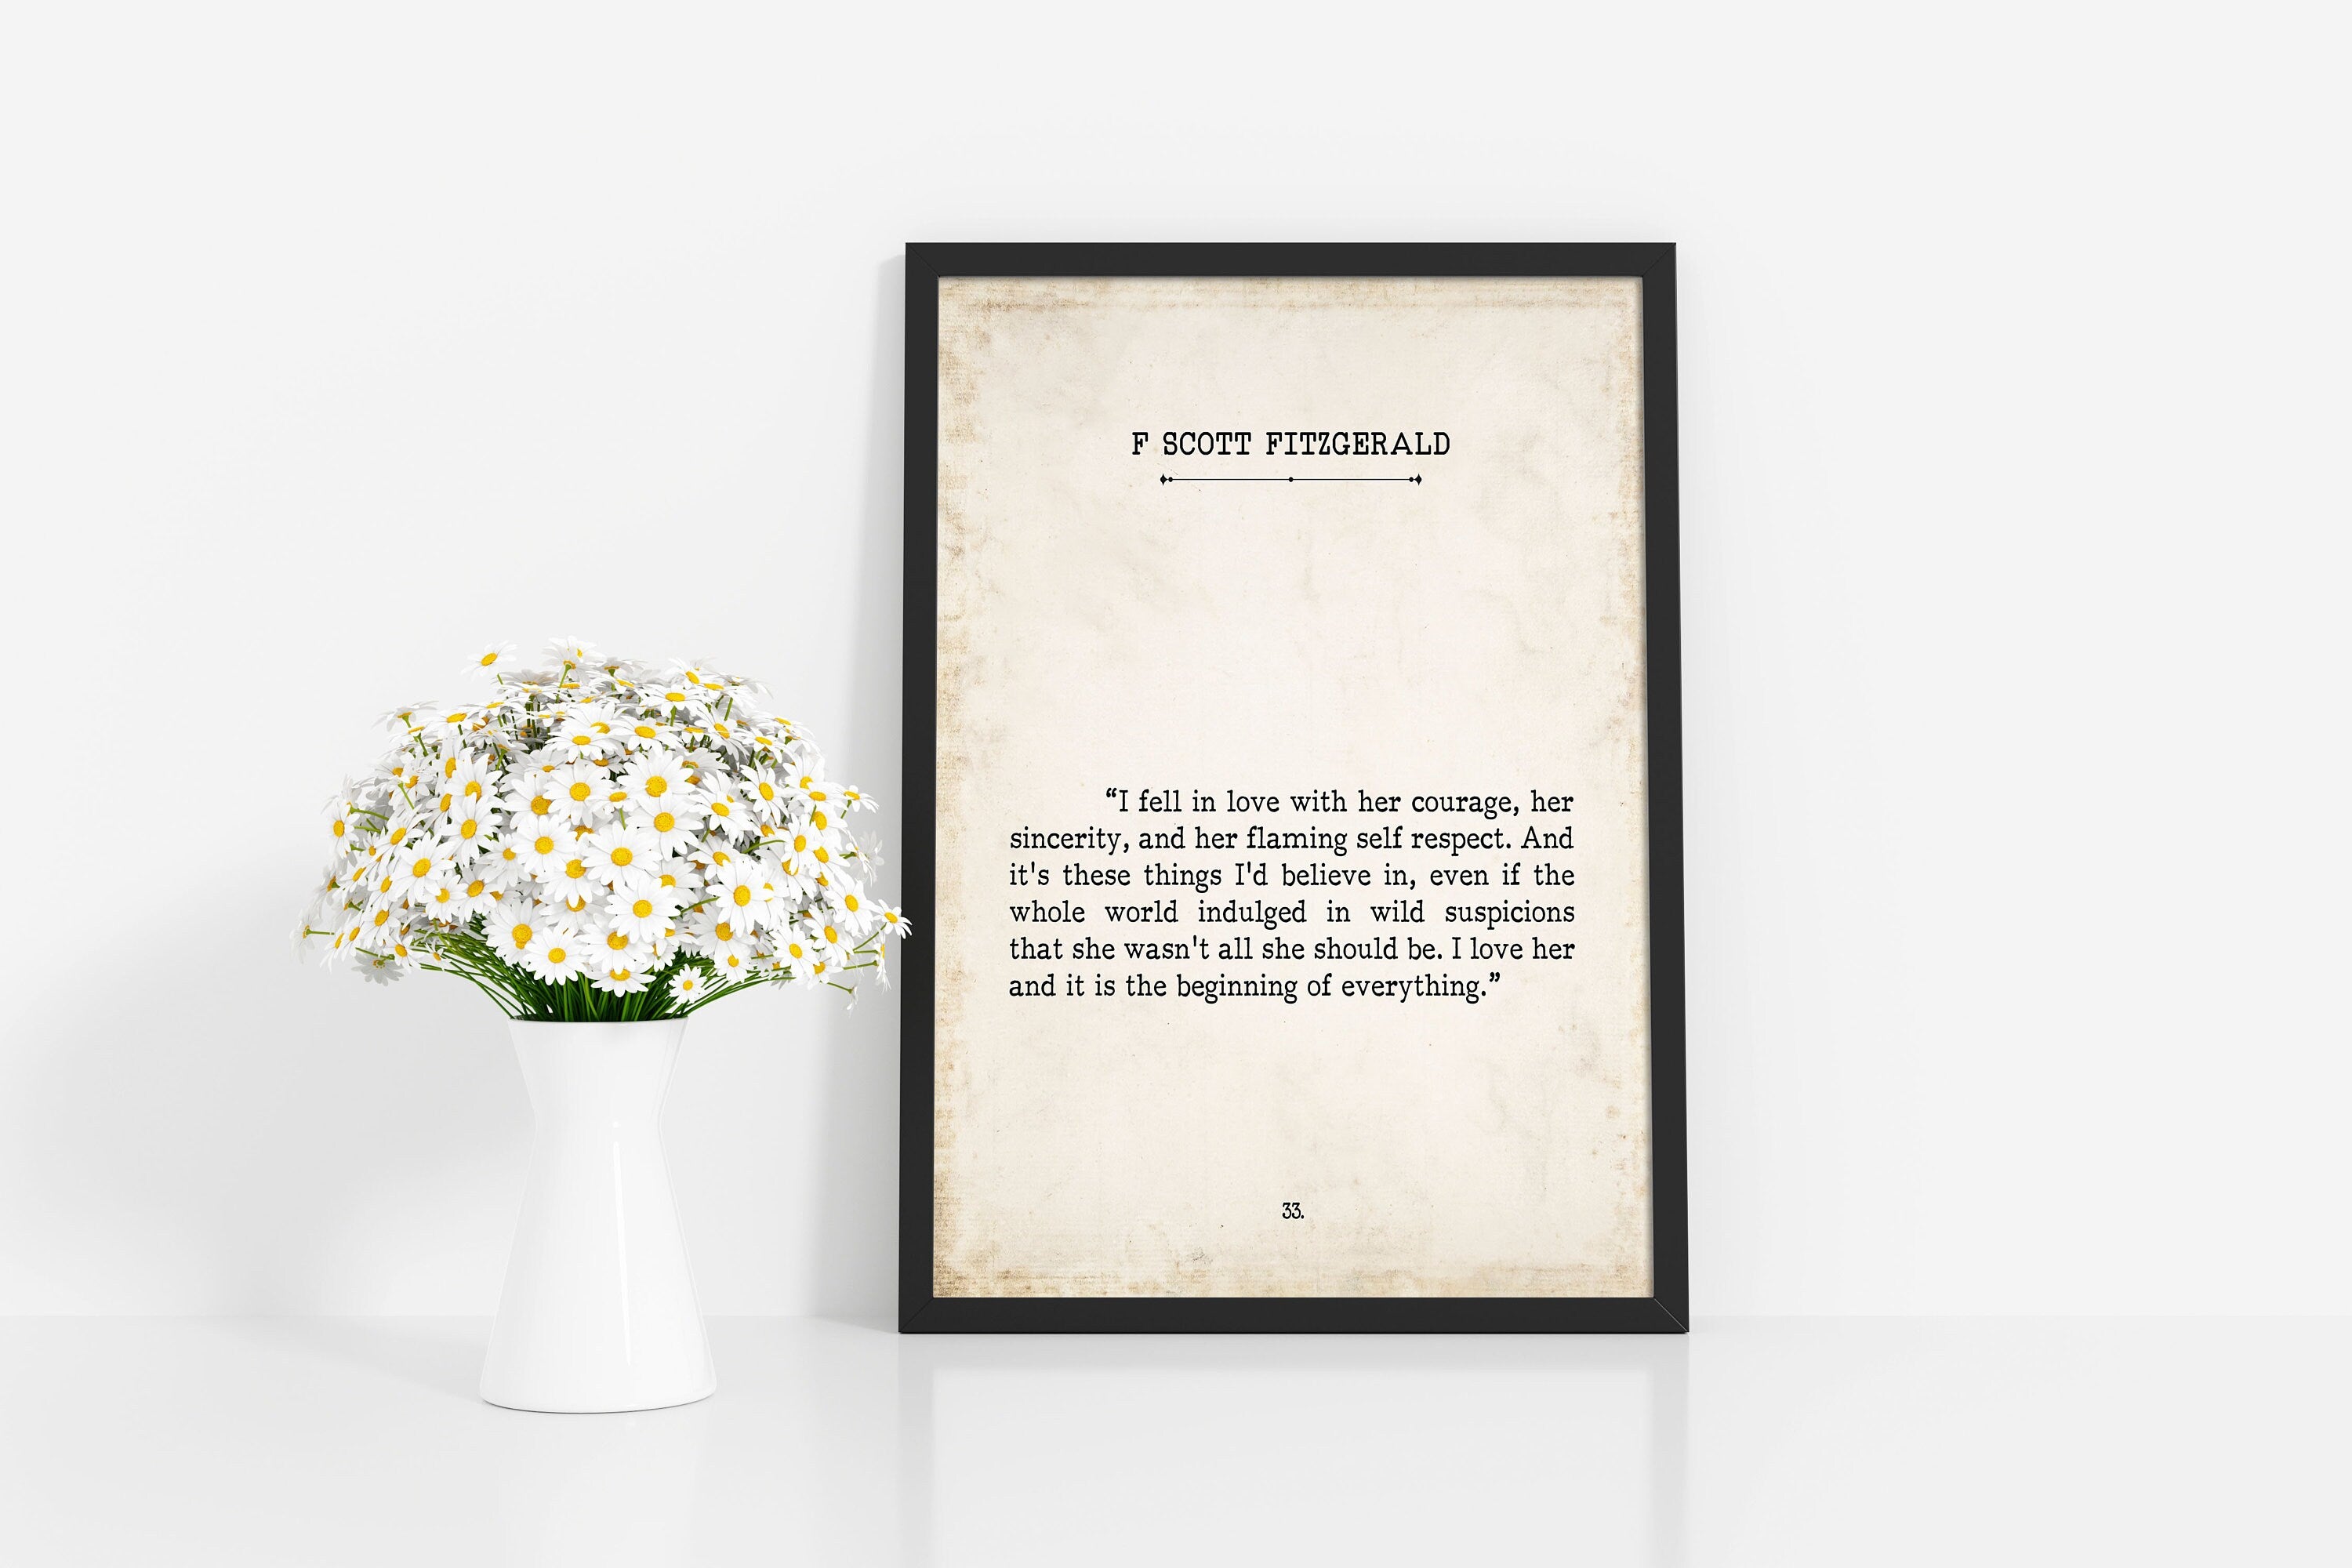 I Love Her FS Fitzgerald Book Page Inspirational Wall Art, Unframed Vintage Style Print Wall Decor I Fell In Love With Her Courage